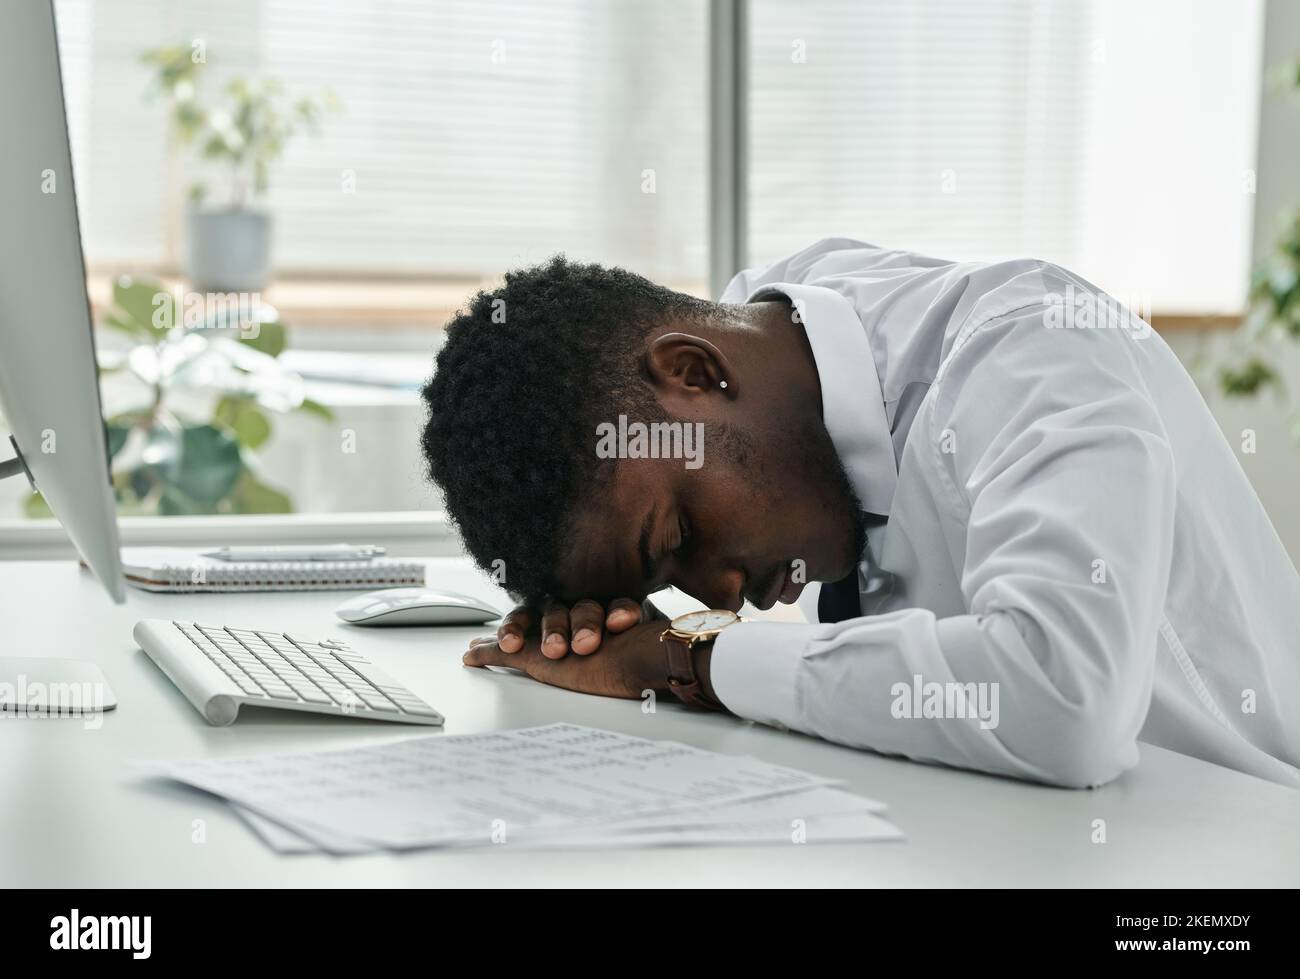 African American tired businessman sleeping at workplace in front of computer at office Stock Photo